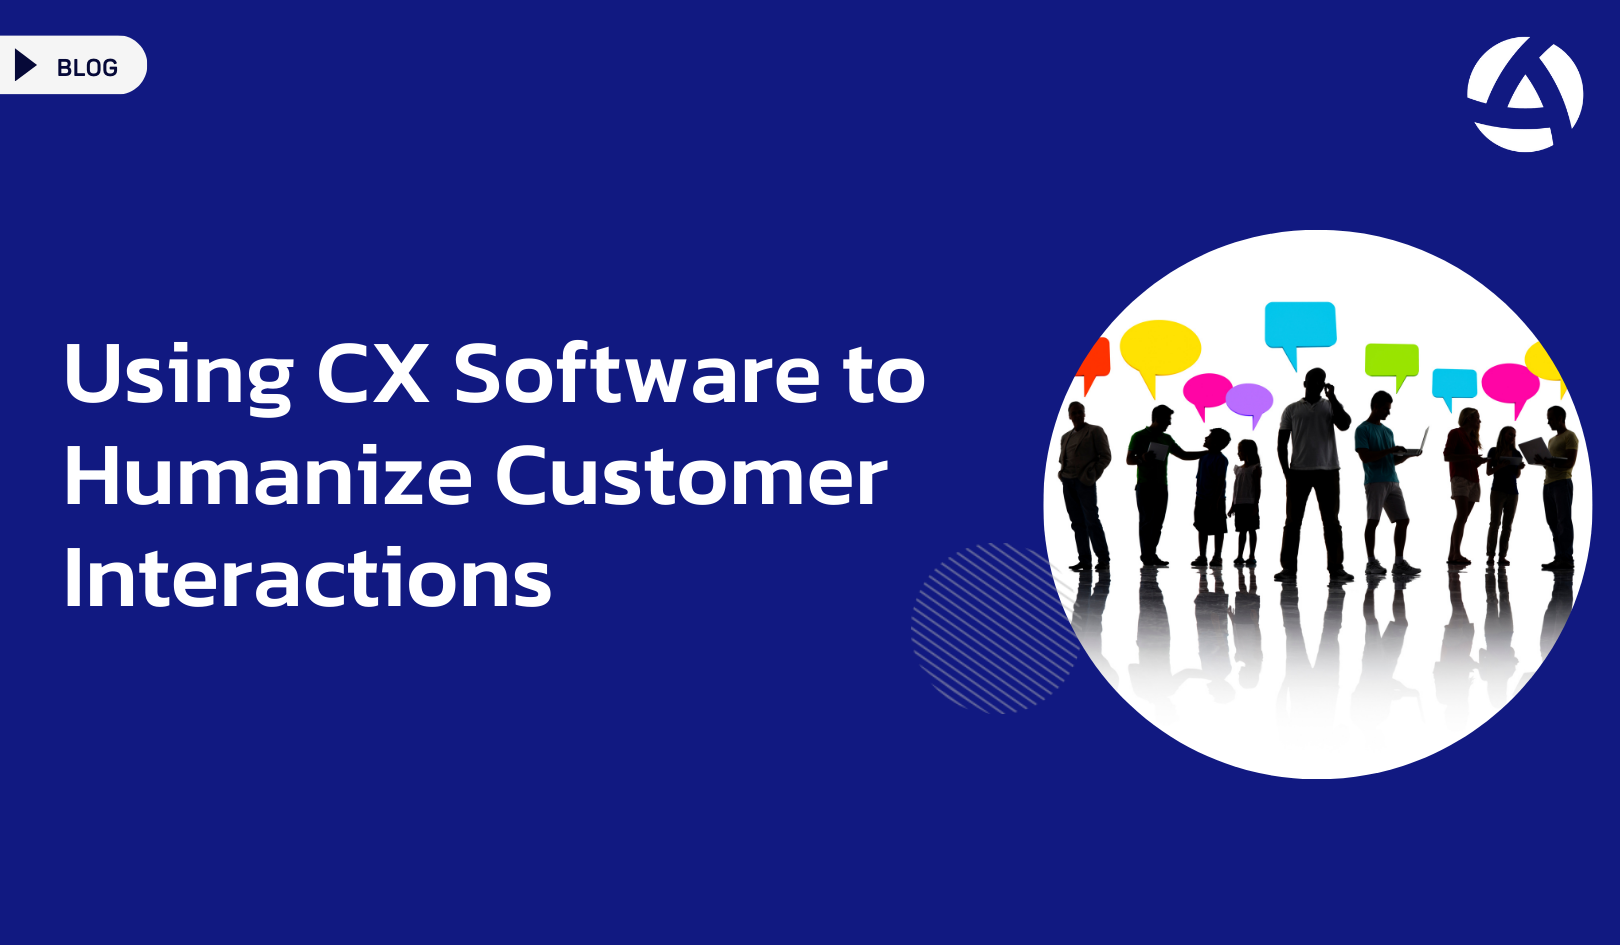 Using CX Software to Humanize Customer Interactions